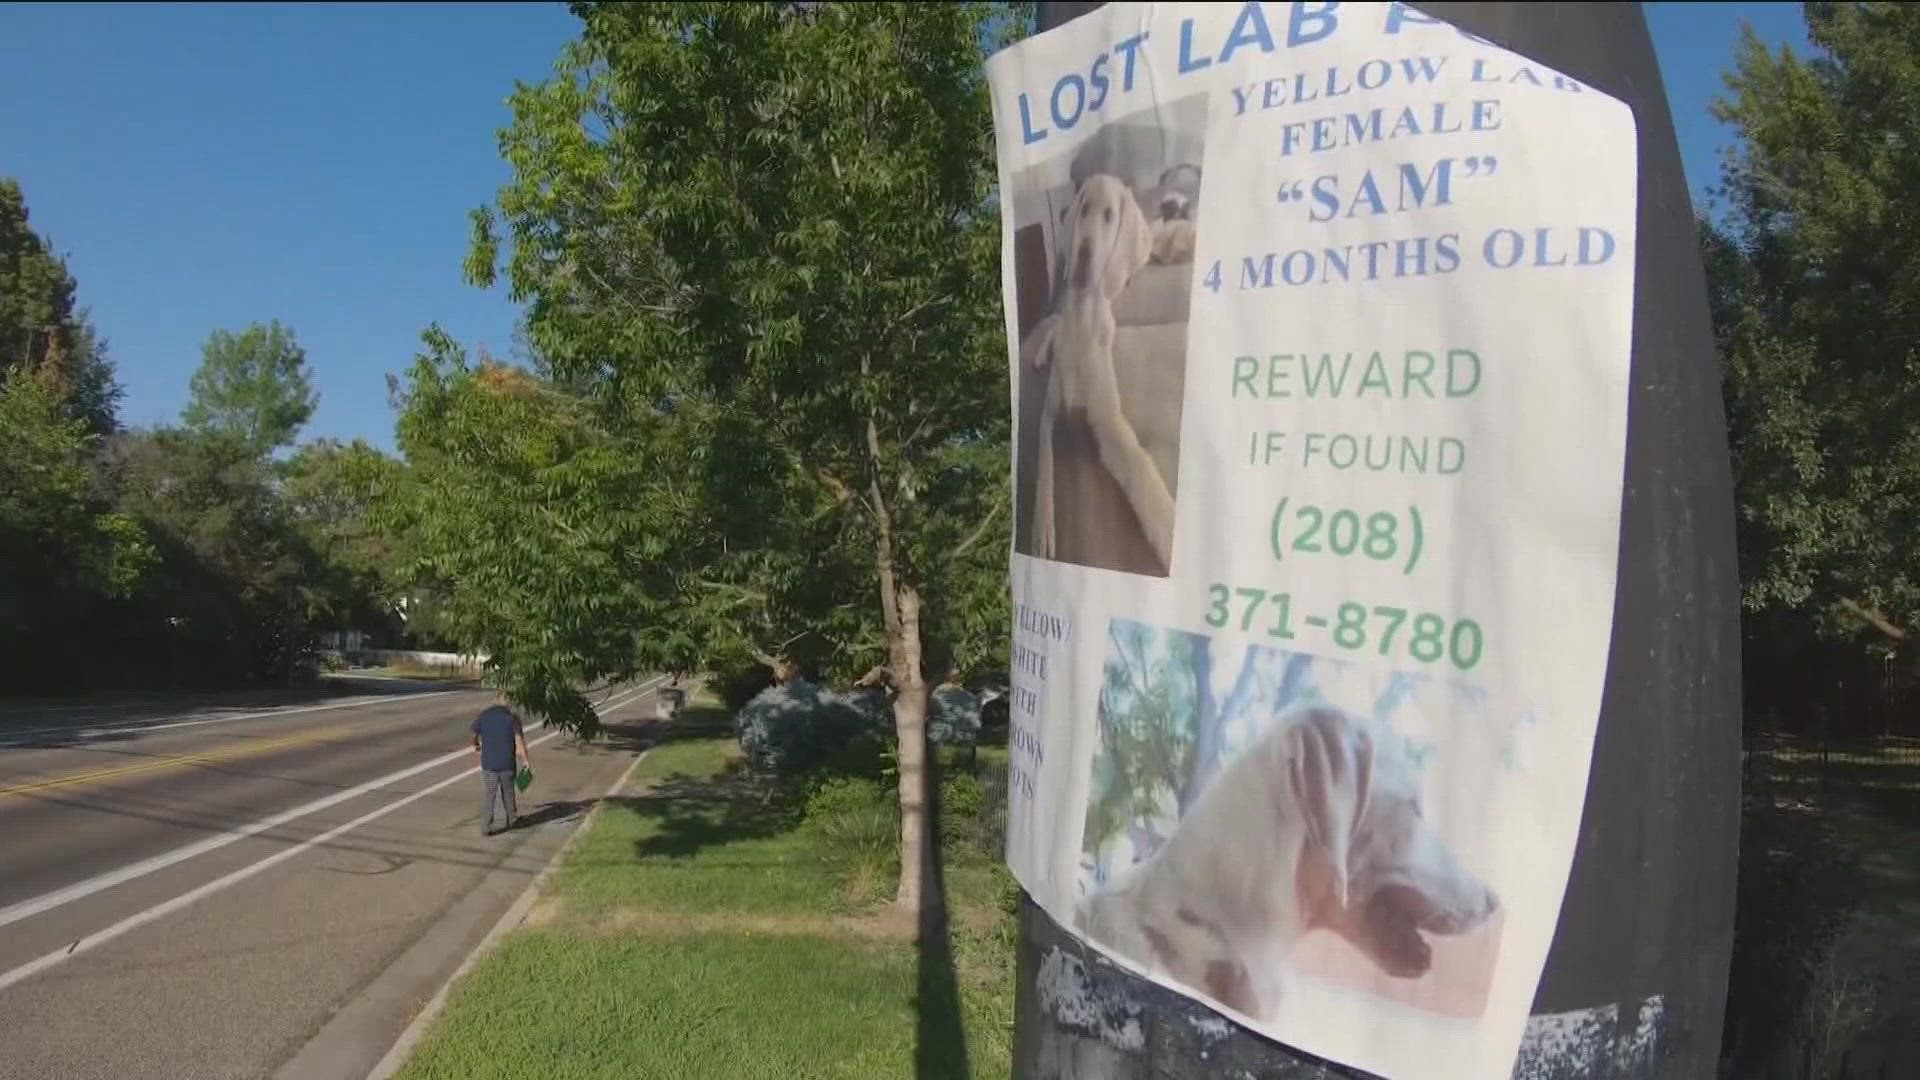 After first airing the story of the lost dog, more details have come to light to show it isn't the full story.